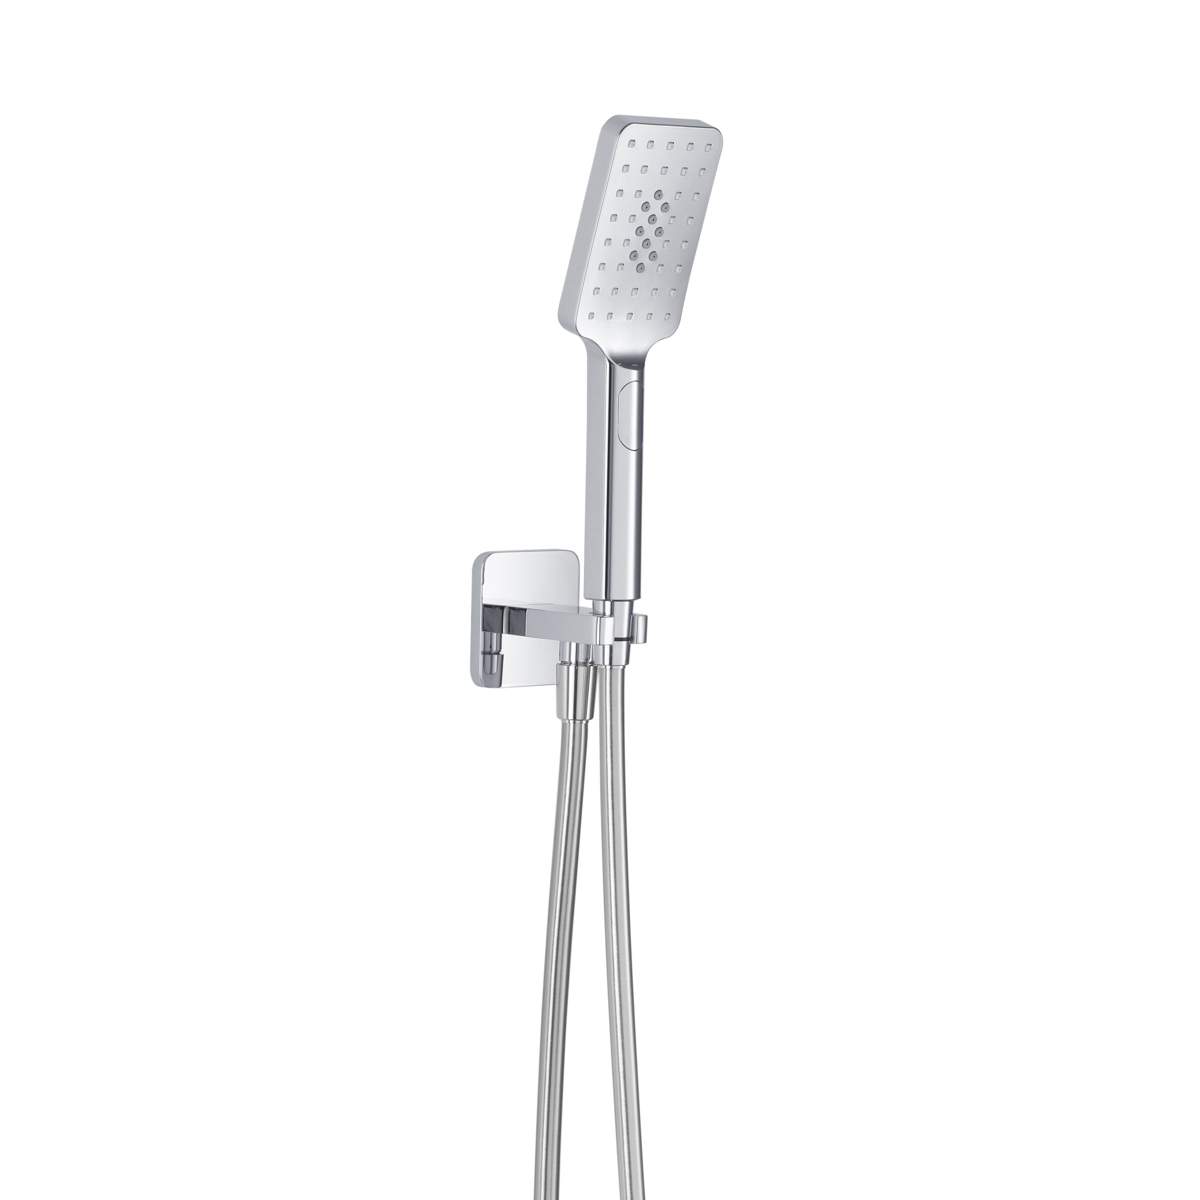 JTP Hix Chrome Square Water Outlet with Holder, Hose and Hand Shower (32SQUARE/WS)